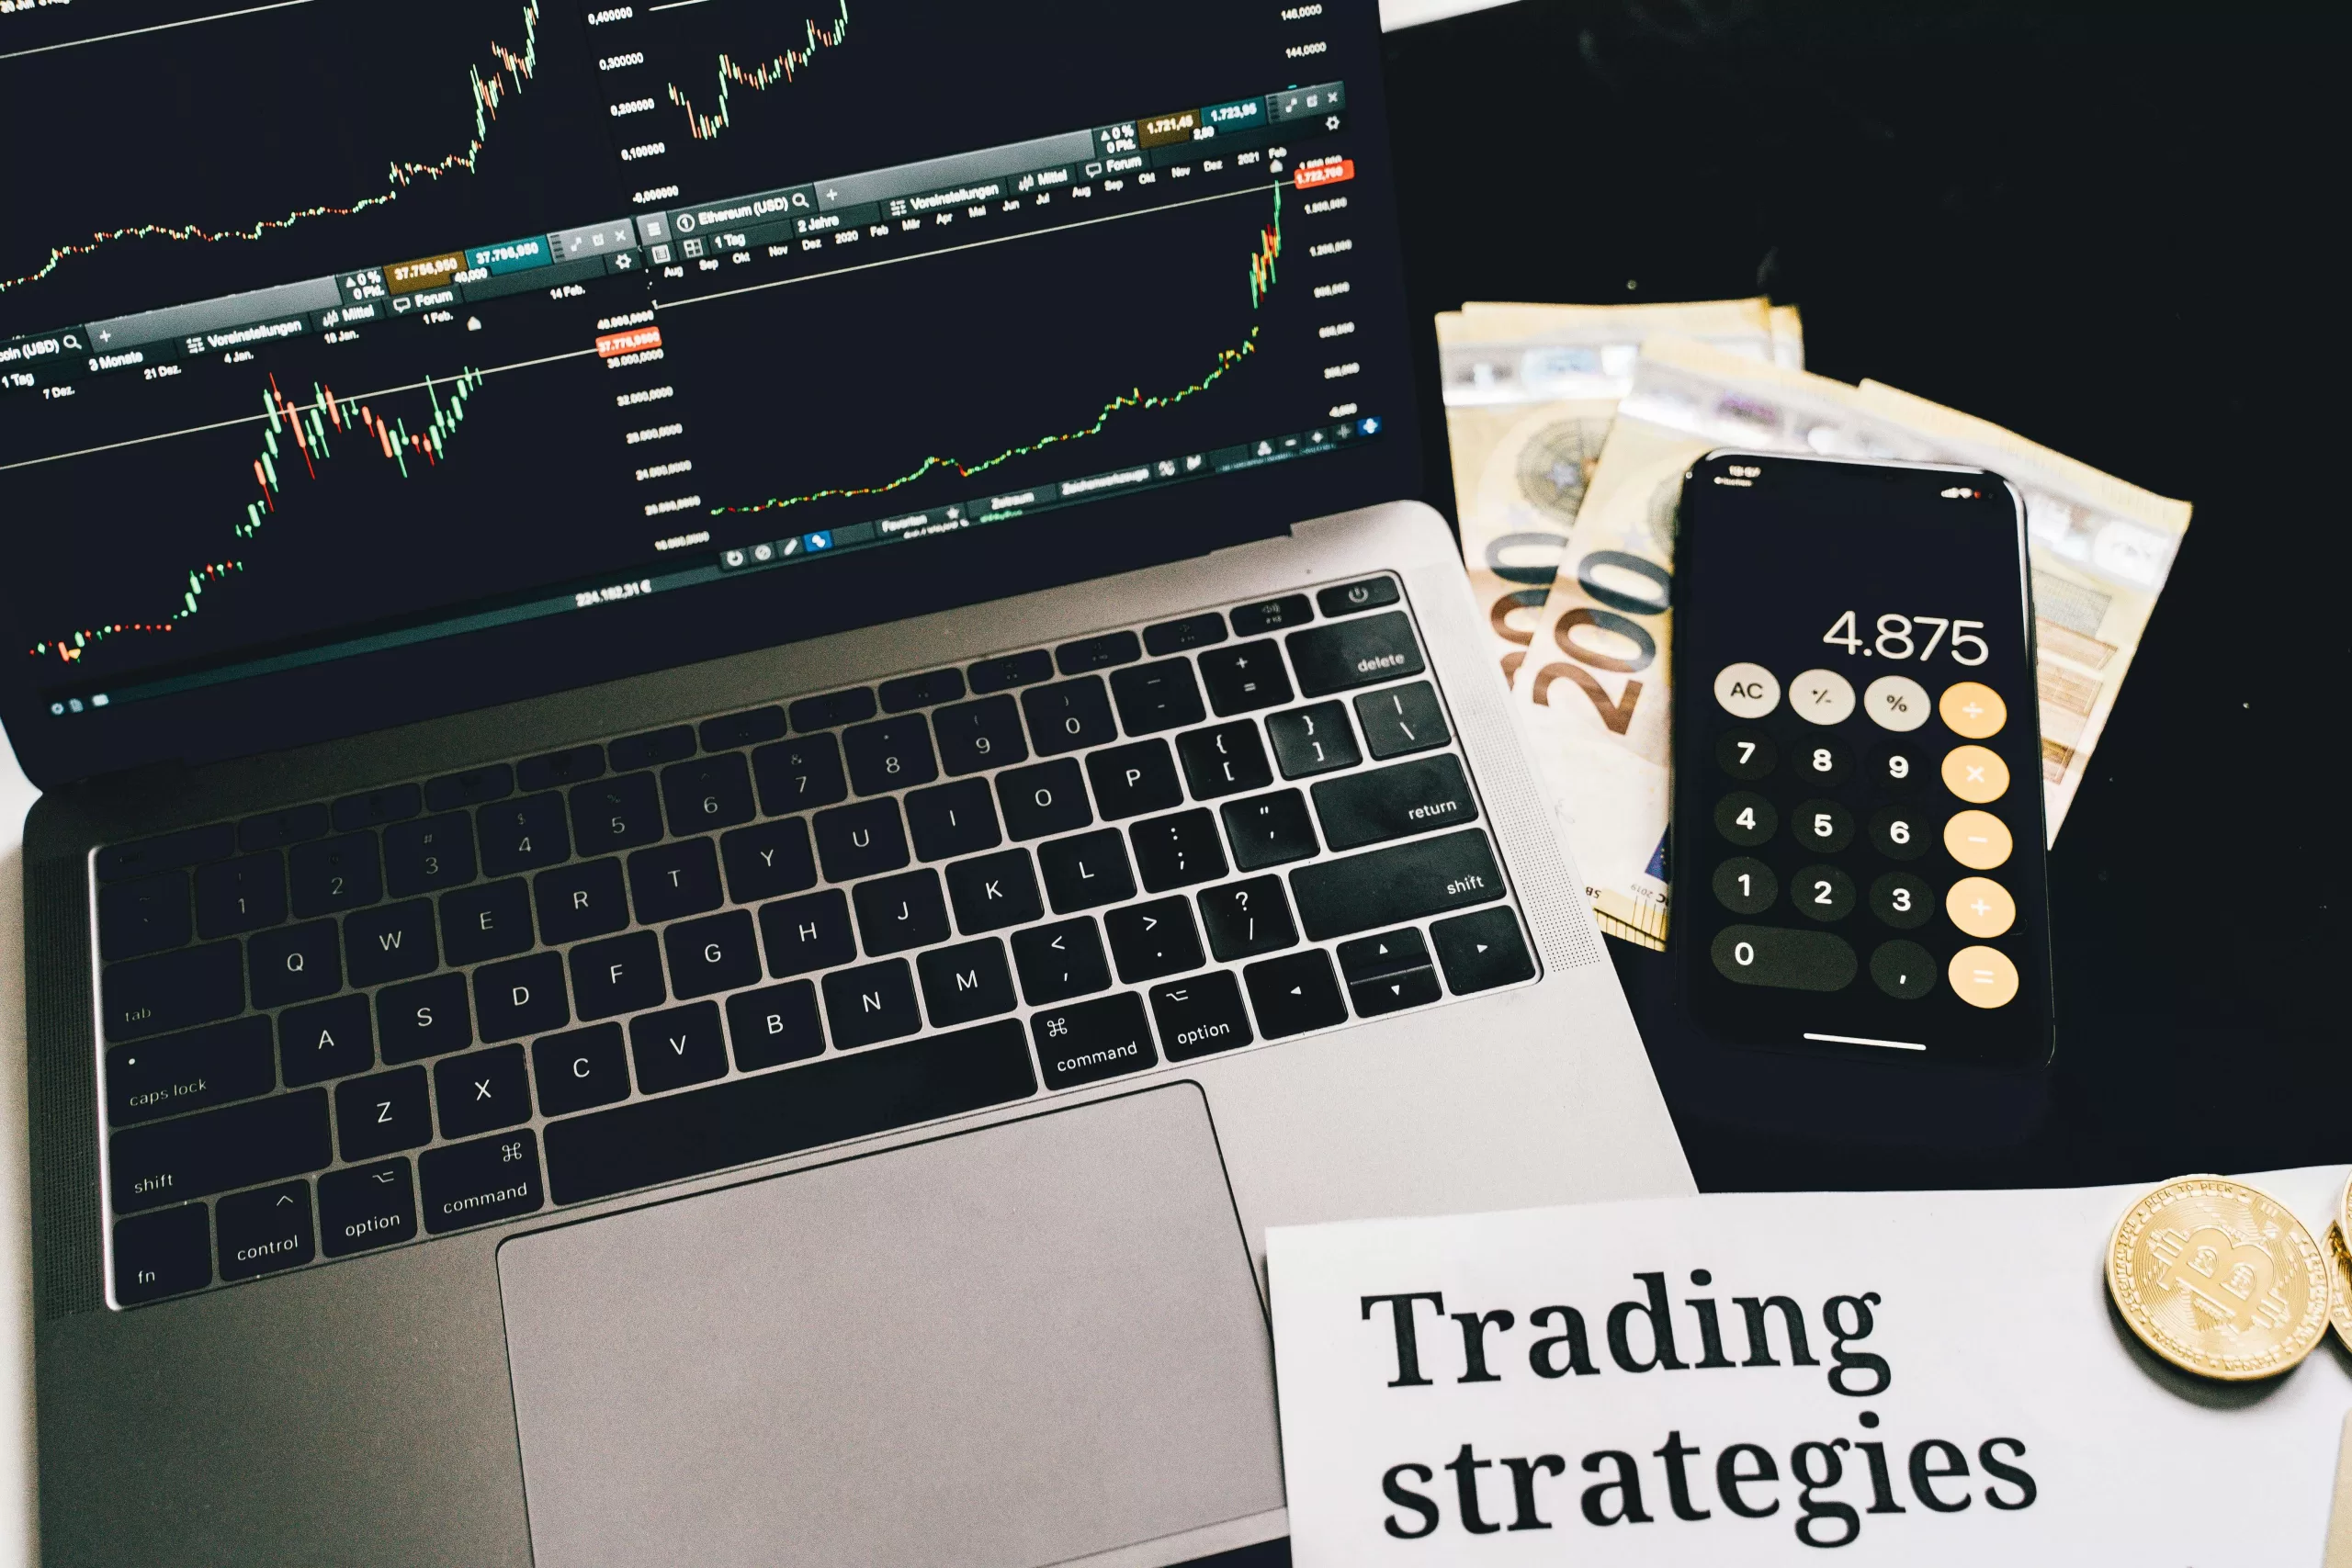 Trading strategies with April CPI forecast